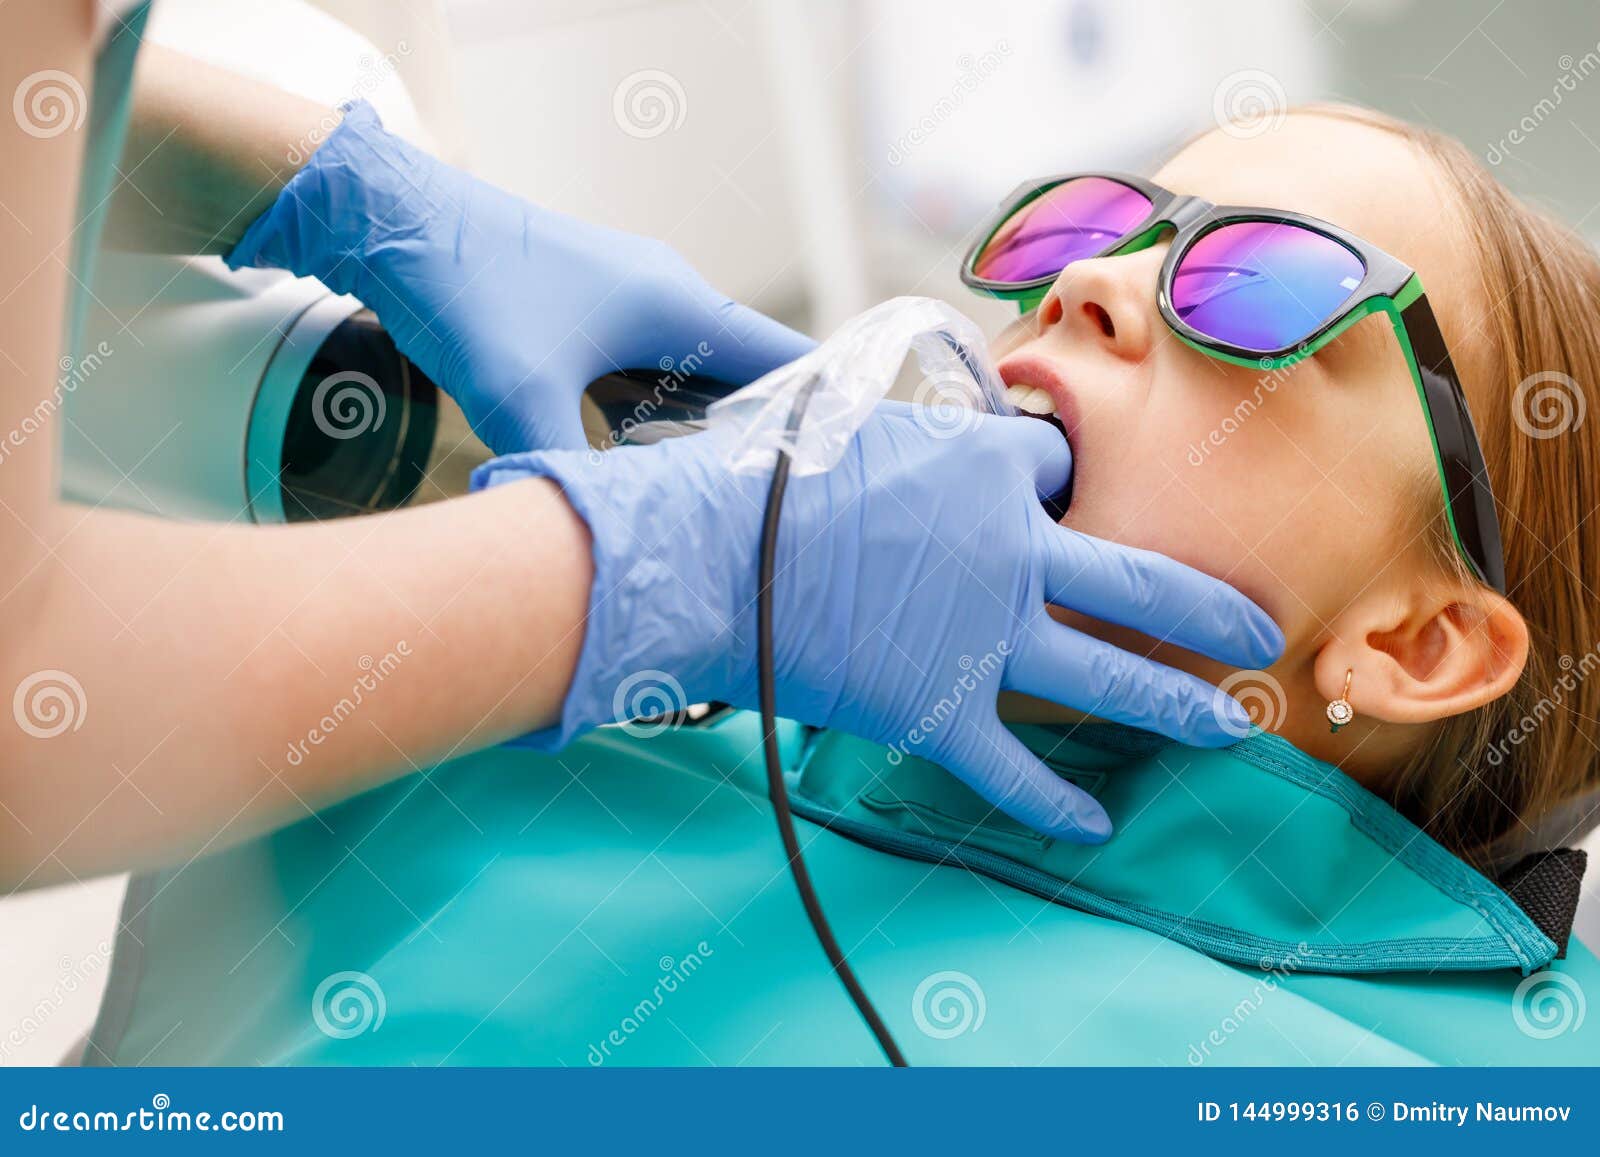 elementary-age-girl-receiving-dental-radiography-or-x-ray-in-pediatric-dental-clinic-stock-photo